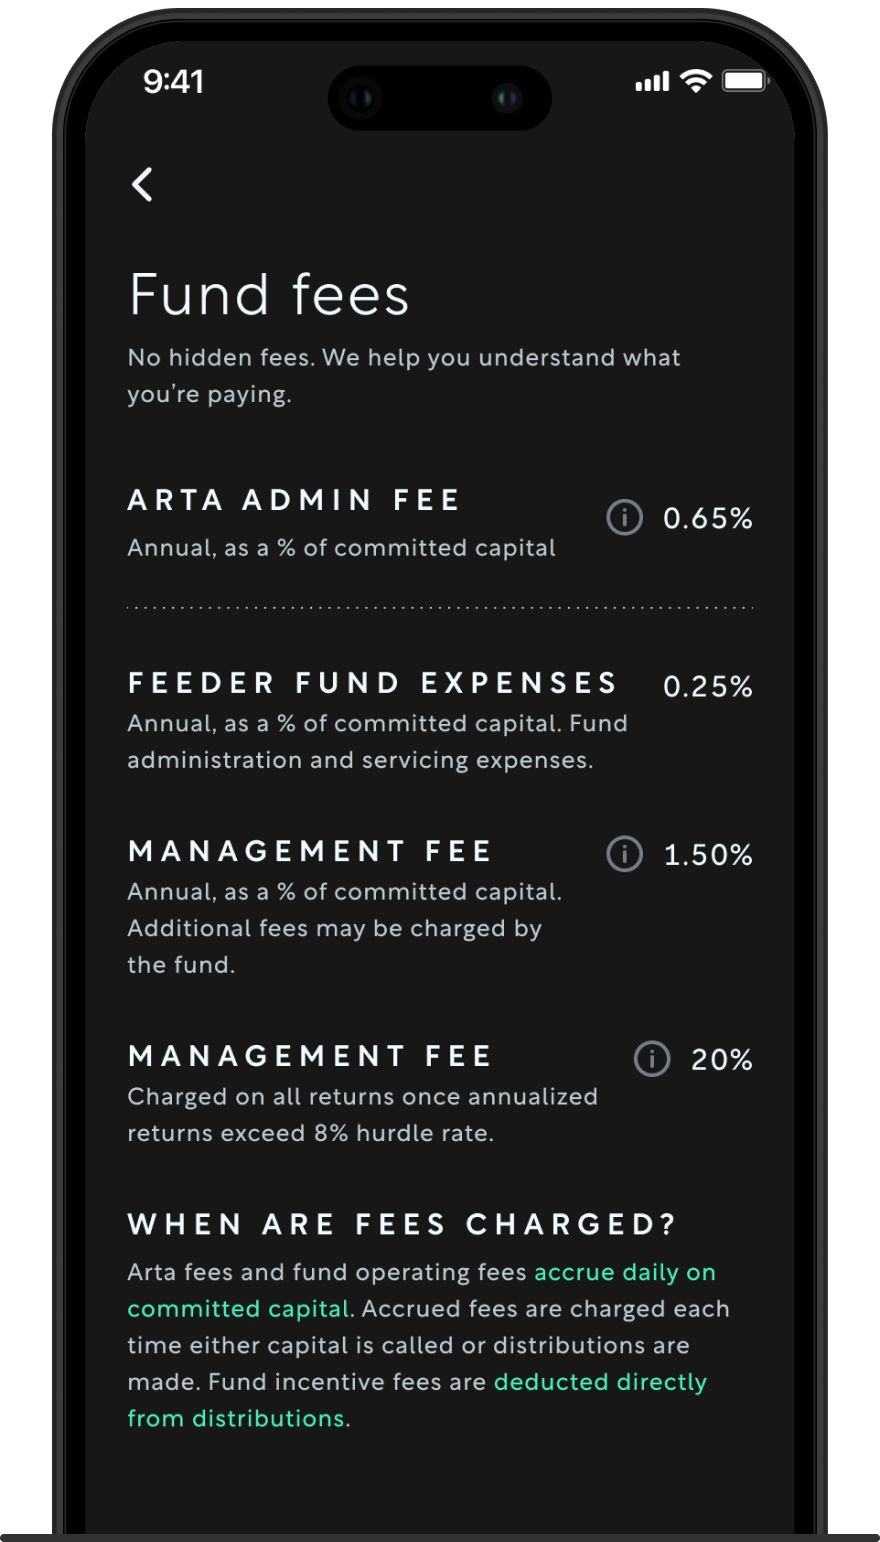 A sample screen of the fund fees page